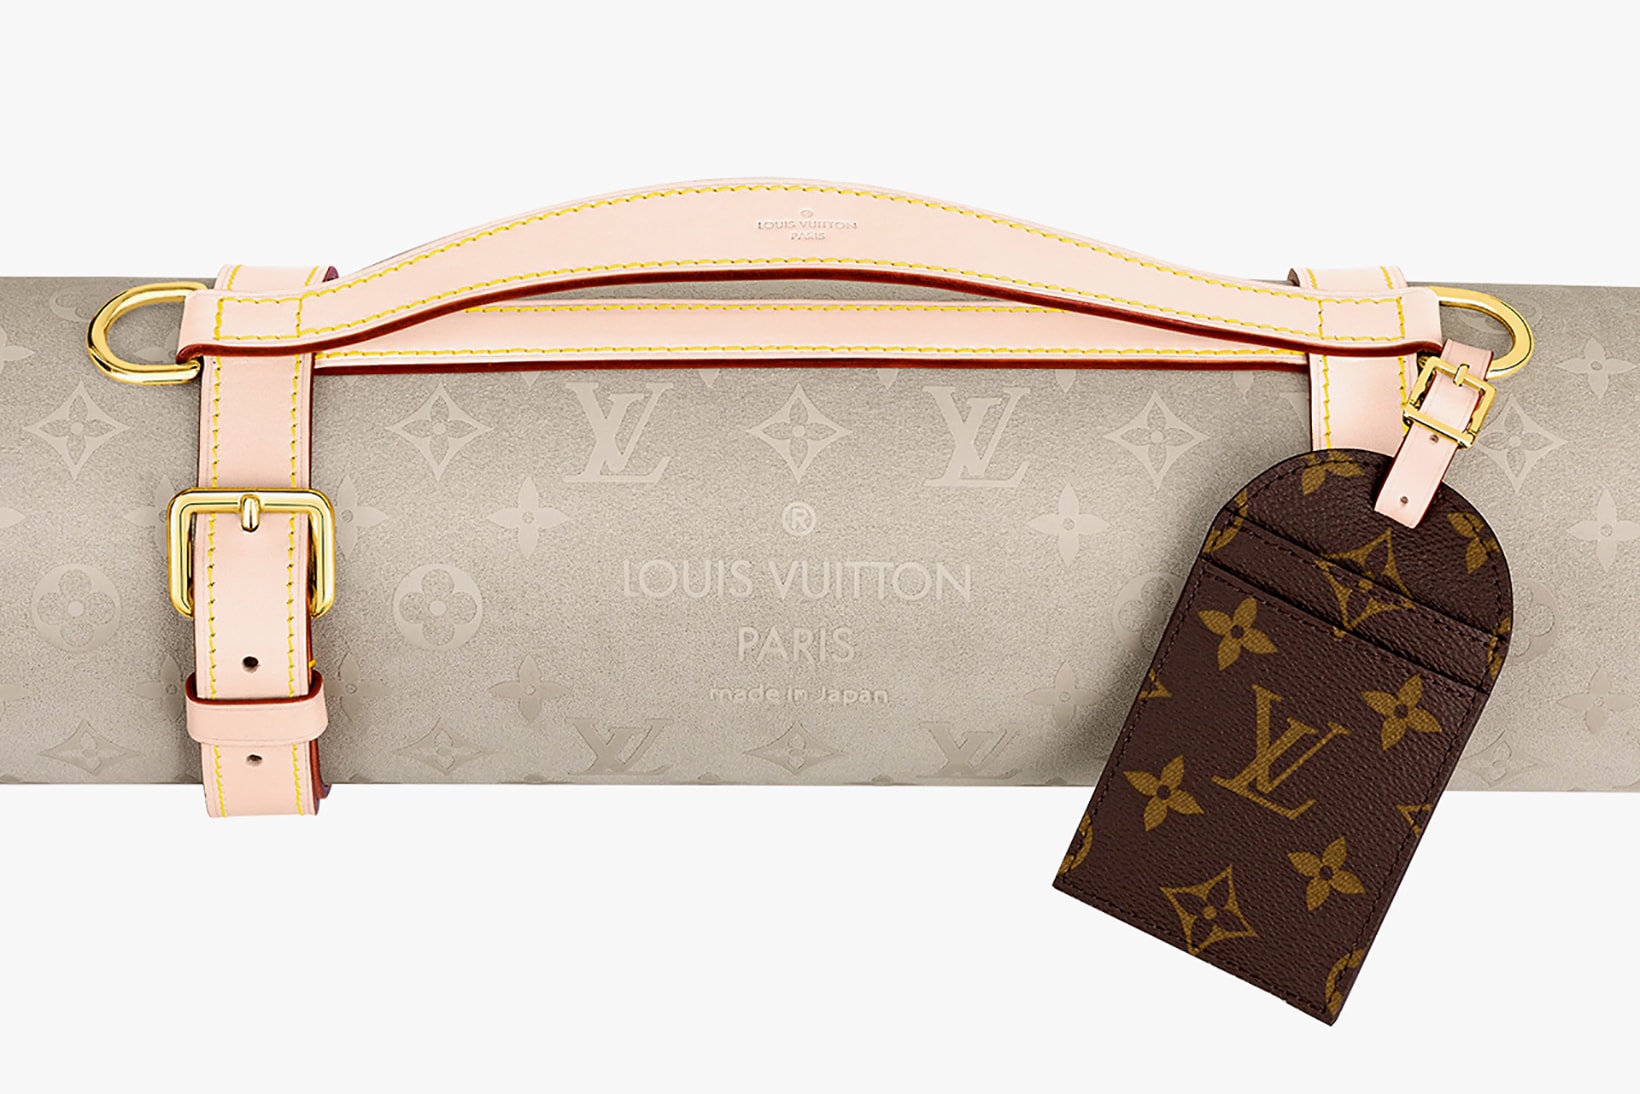 Louis Vuitton Luxury 2 waterproof house and room decoration shower